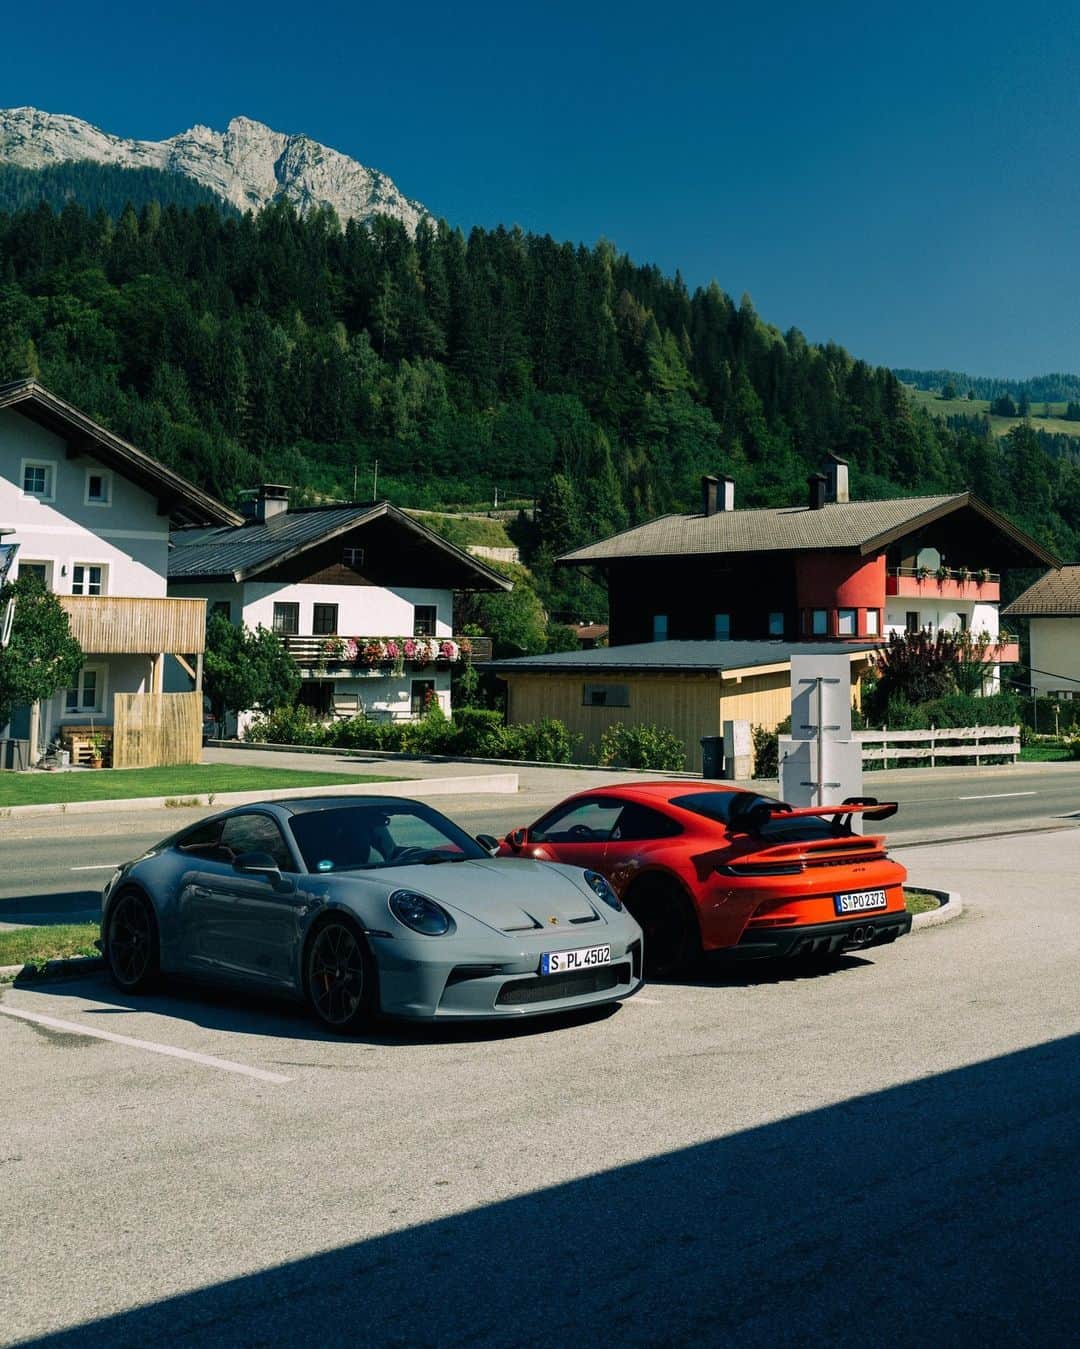 Porscheのインスタグラム：「Next stop, the Alps! Join us as we gather together some 911 friends and set out on a road trip through breathtaking scenery. For two days they explore remote Alpine roads and villages, taking in views that will linger long in the memory. A 911 and mountains? There are few better ingredients for a perfect road trip. 📷 @andrew_ftw and @thvddeus  __ 911 GT3: Fuel consumption combined in l/100 km: 13,0 - 12,9 (WLTP); CO2 emissions combined in g/km: 294 - 293 (WLTP); 911 Carrera GTS: Fuel consumption combined in l/100 km: 11,4 - 10,4 (WLTP); CO2 emissions combined in g/km: 258 - 236 (WLTP); 911 Turbo S Cabriolet: Fuel consumption combined in l/100 km: 12,5 - 12,1 (WLTP); CO2 emissions combined in g/km: 284 - 275 (WLTP) I https://porsche.click/DAT-Leitfaden I Status: 09/2023」